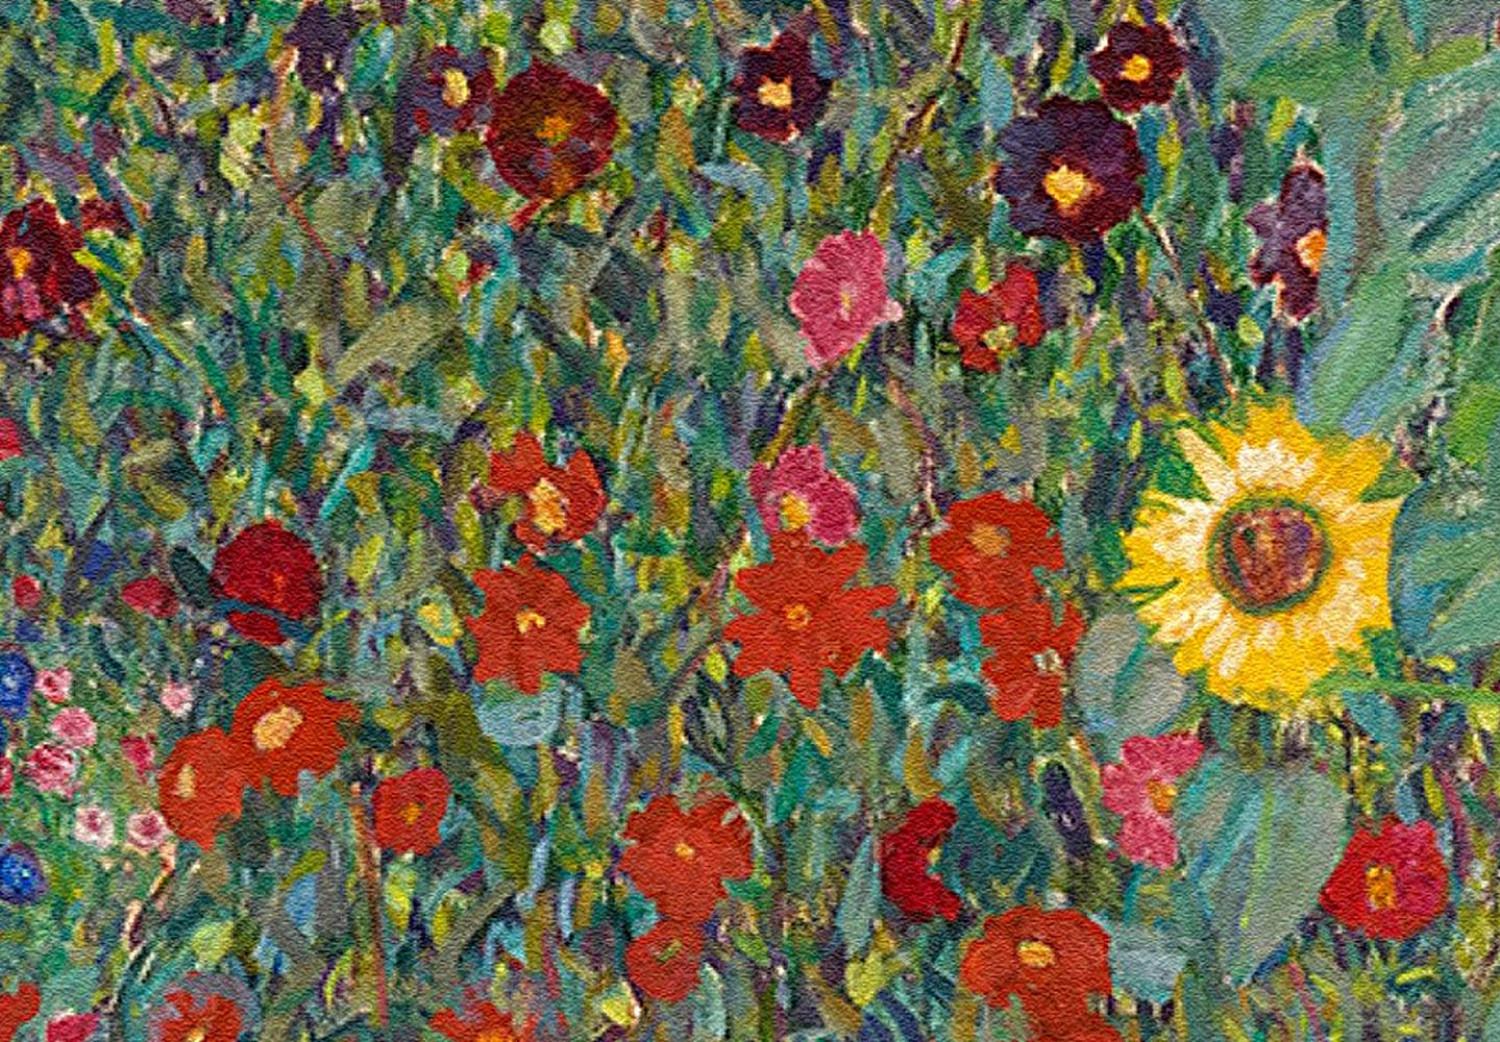 Round Canvas Country Garden With Sunflowers, Gustav Klimt - Multi-Colored Flowers